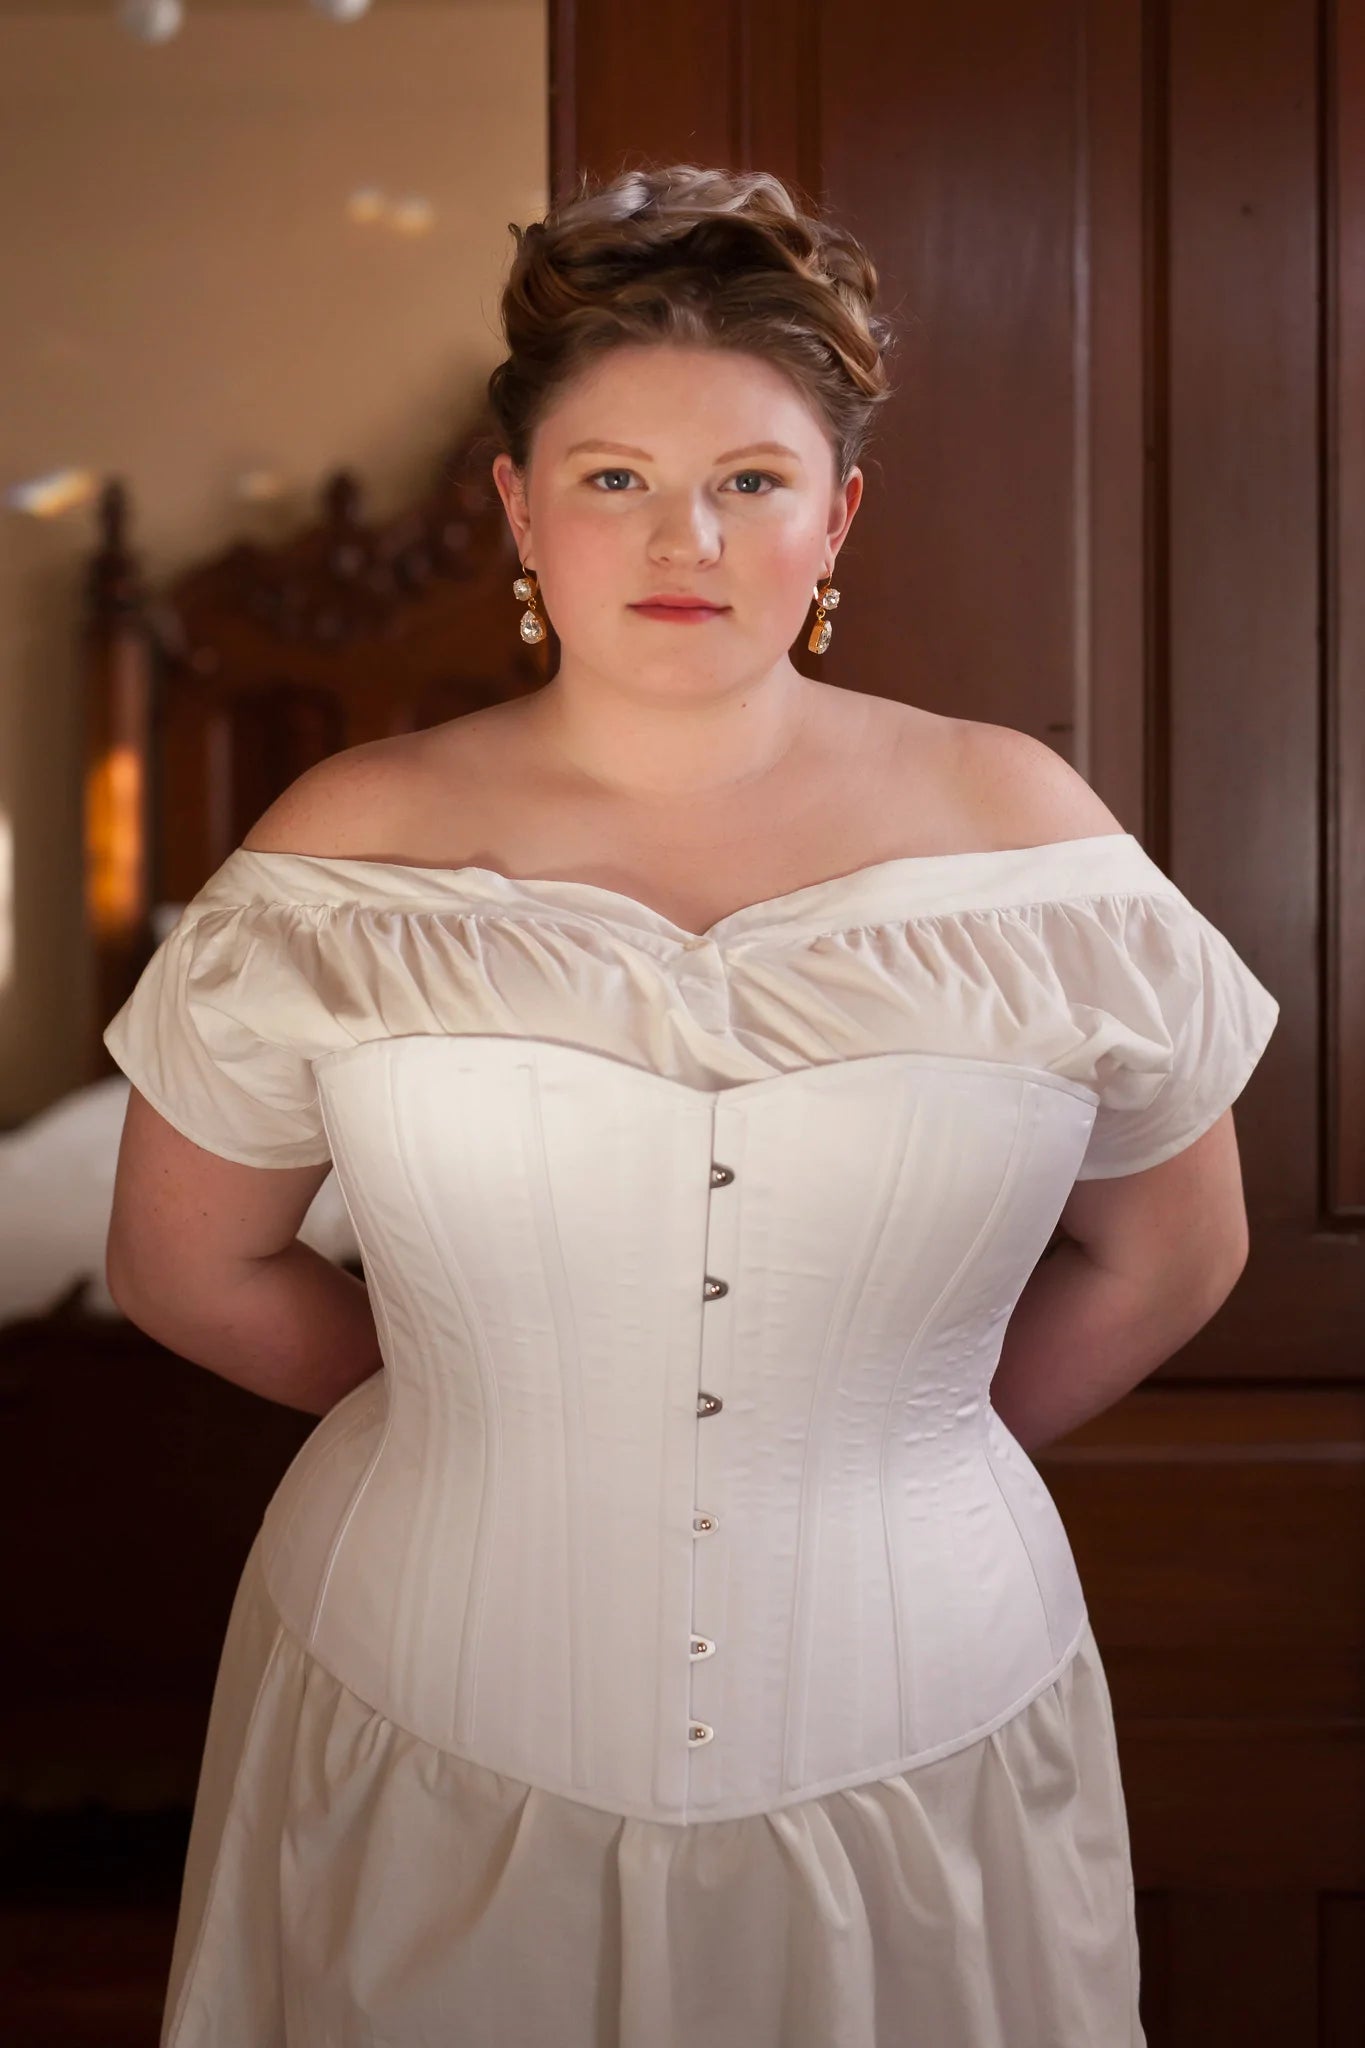 XL Victorian Corset Sewing Pattern, Digital Download, Plus Size Xl Sizes -   Canada